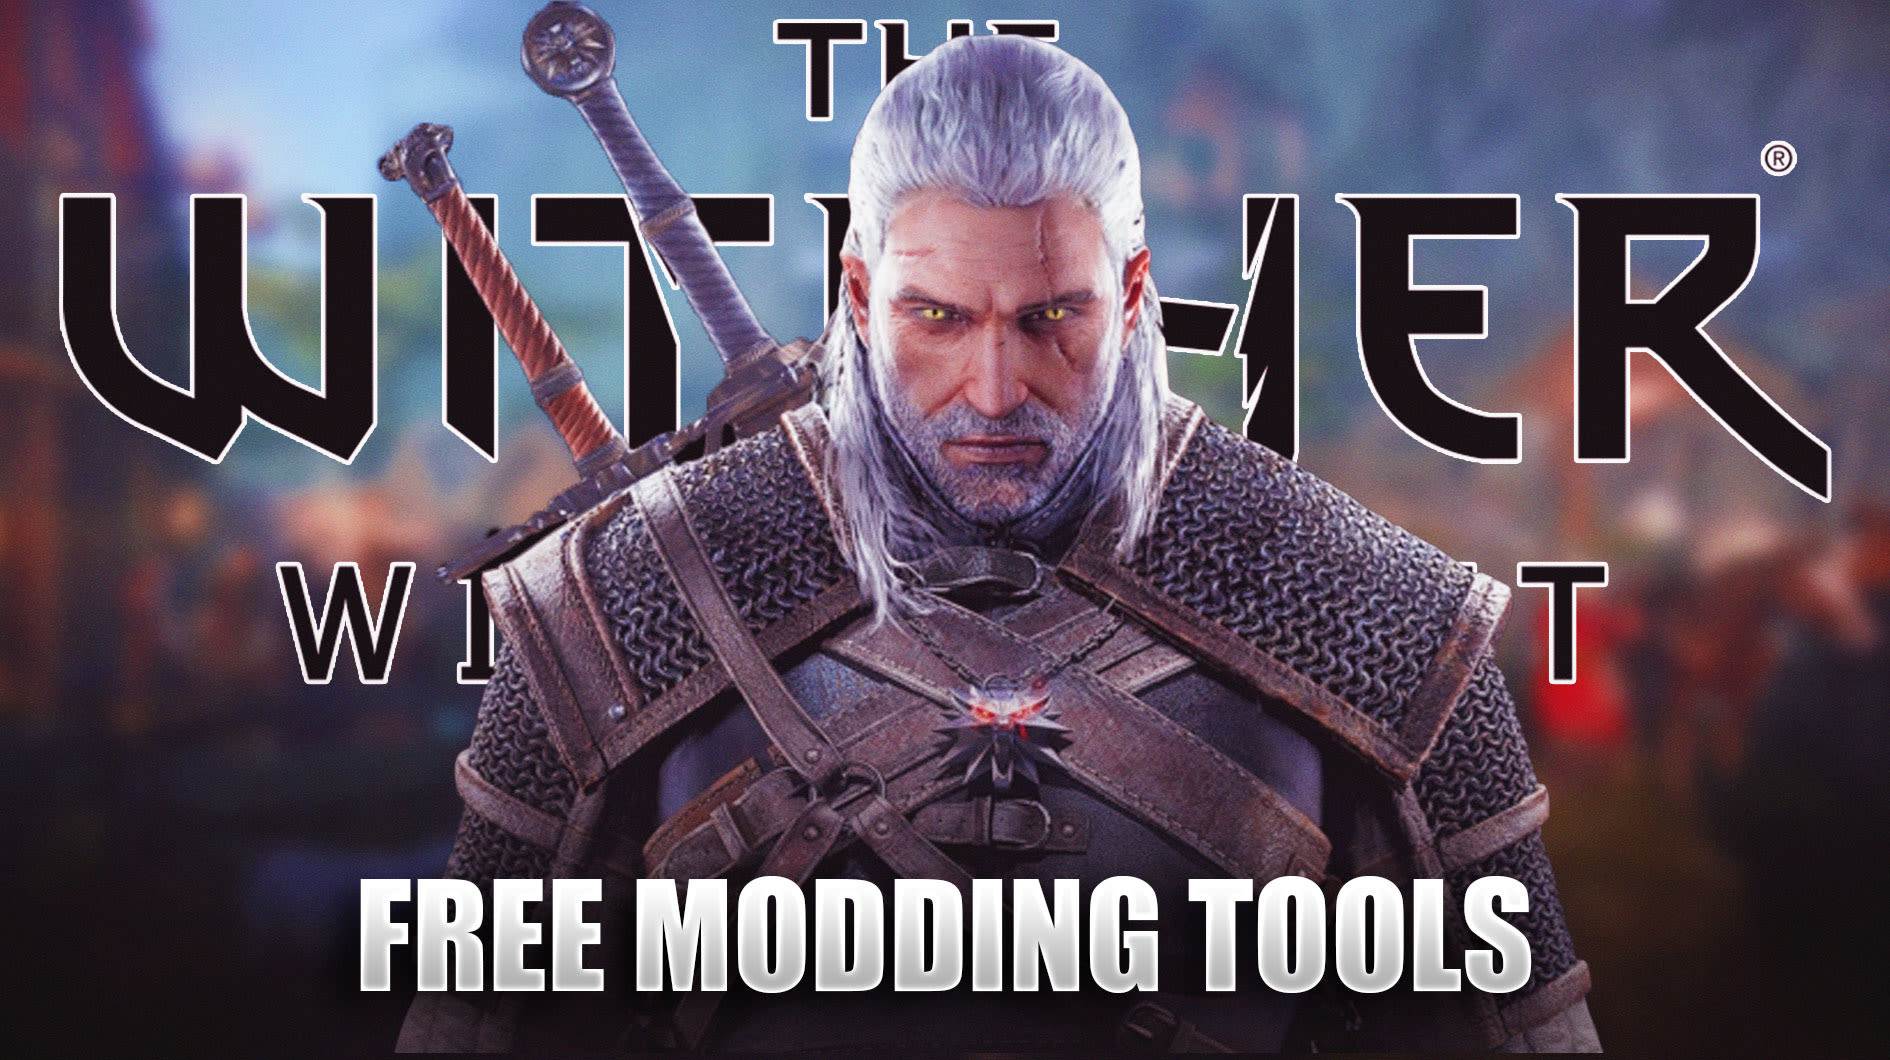 The Witcher 3: Wild Hunt Mods Now Available on Steam